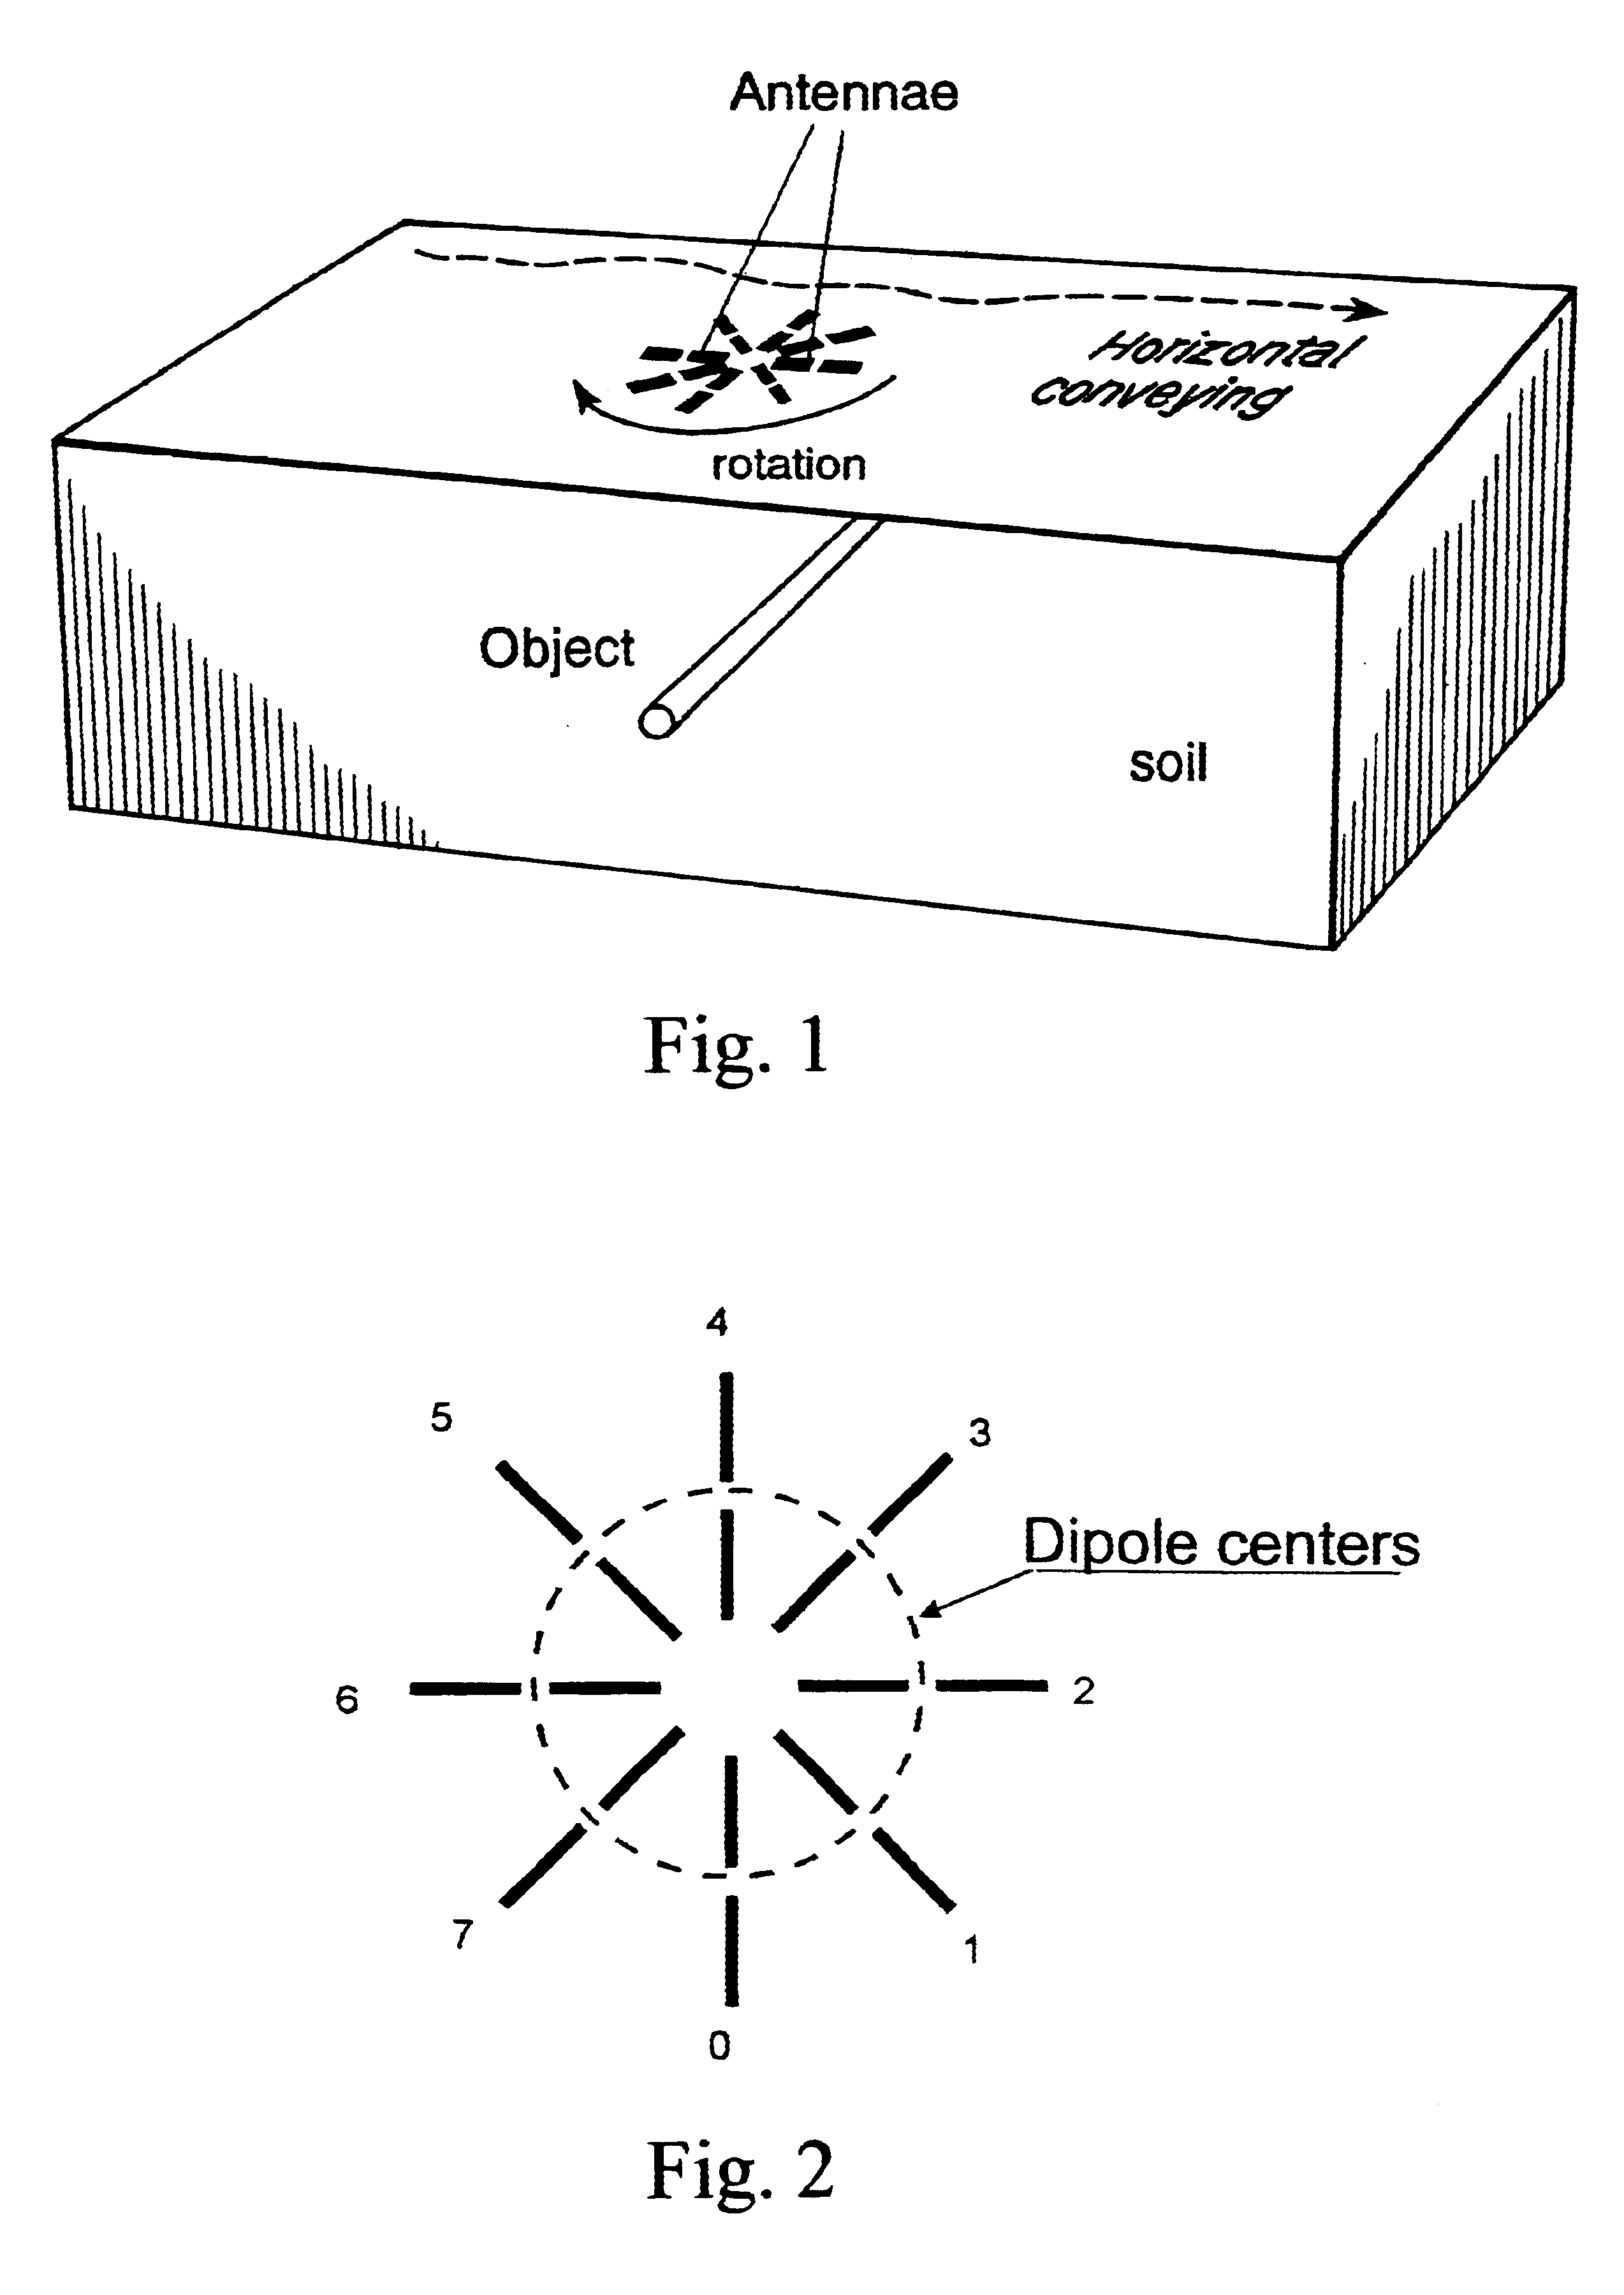 Radar plant and measurement technique for determination of the orientation and the depth of buried objects